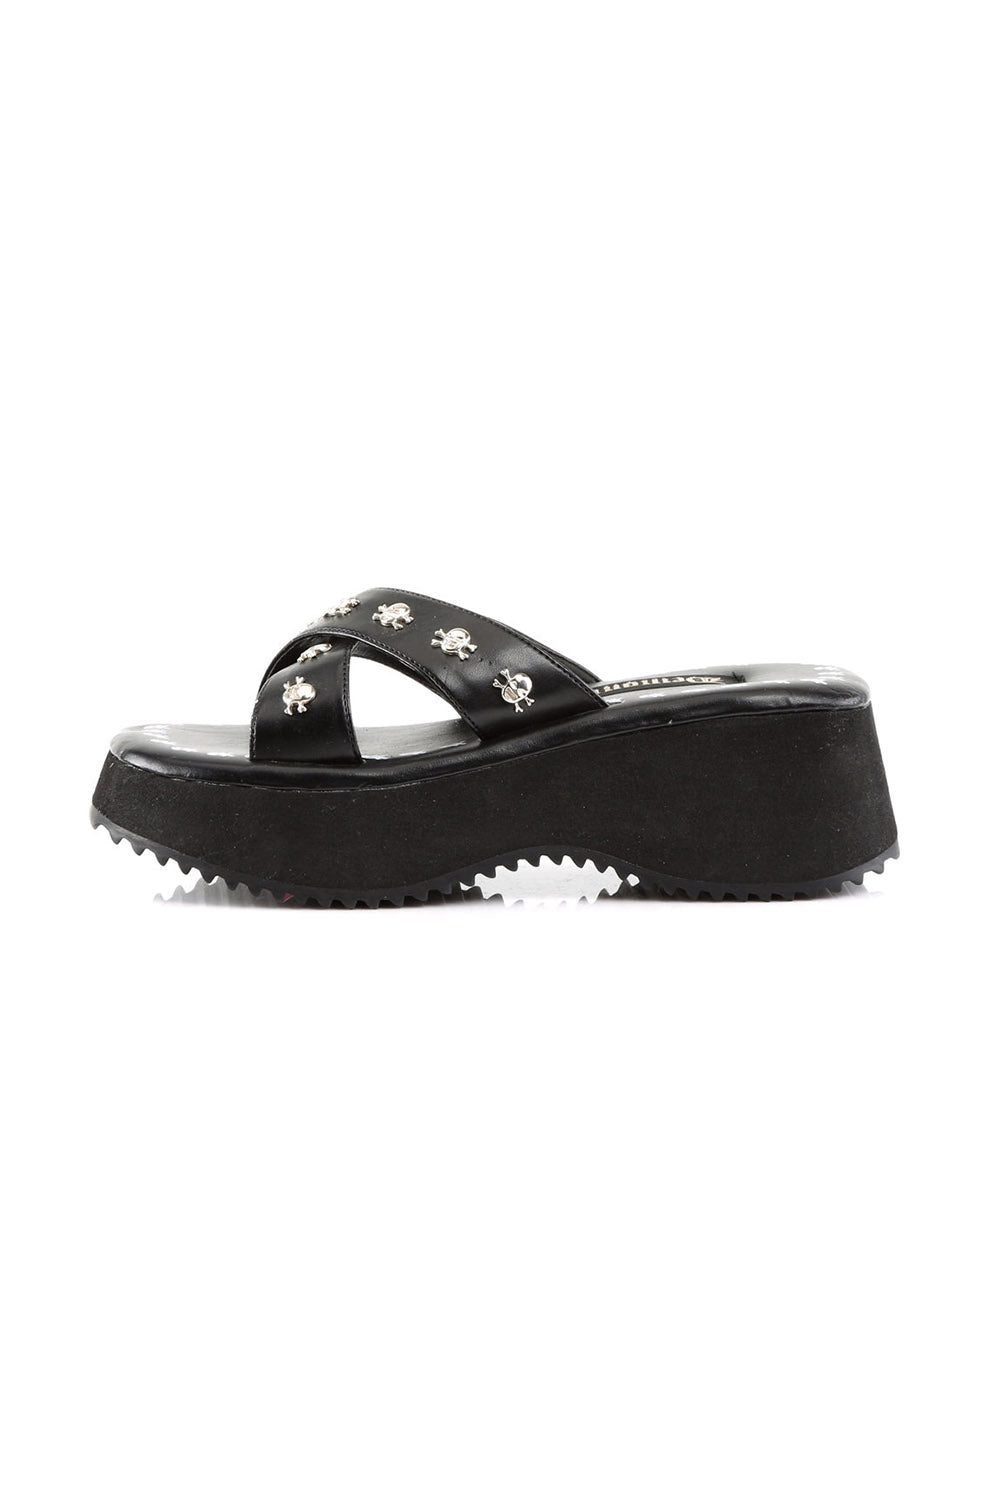 gothic slip on sandals with skull and crossbone studs